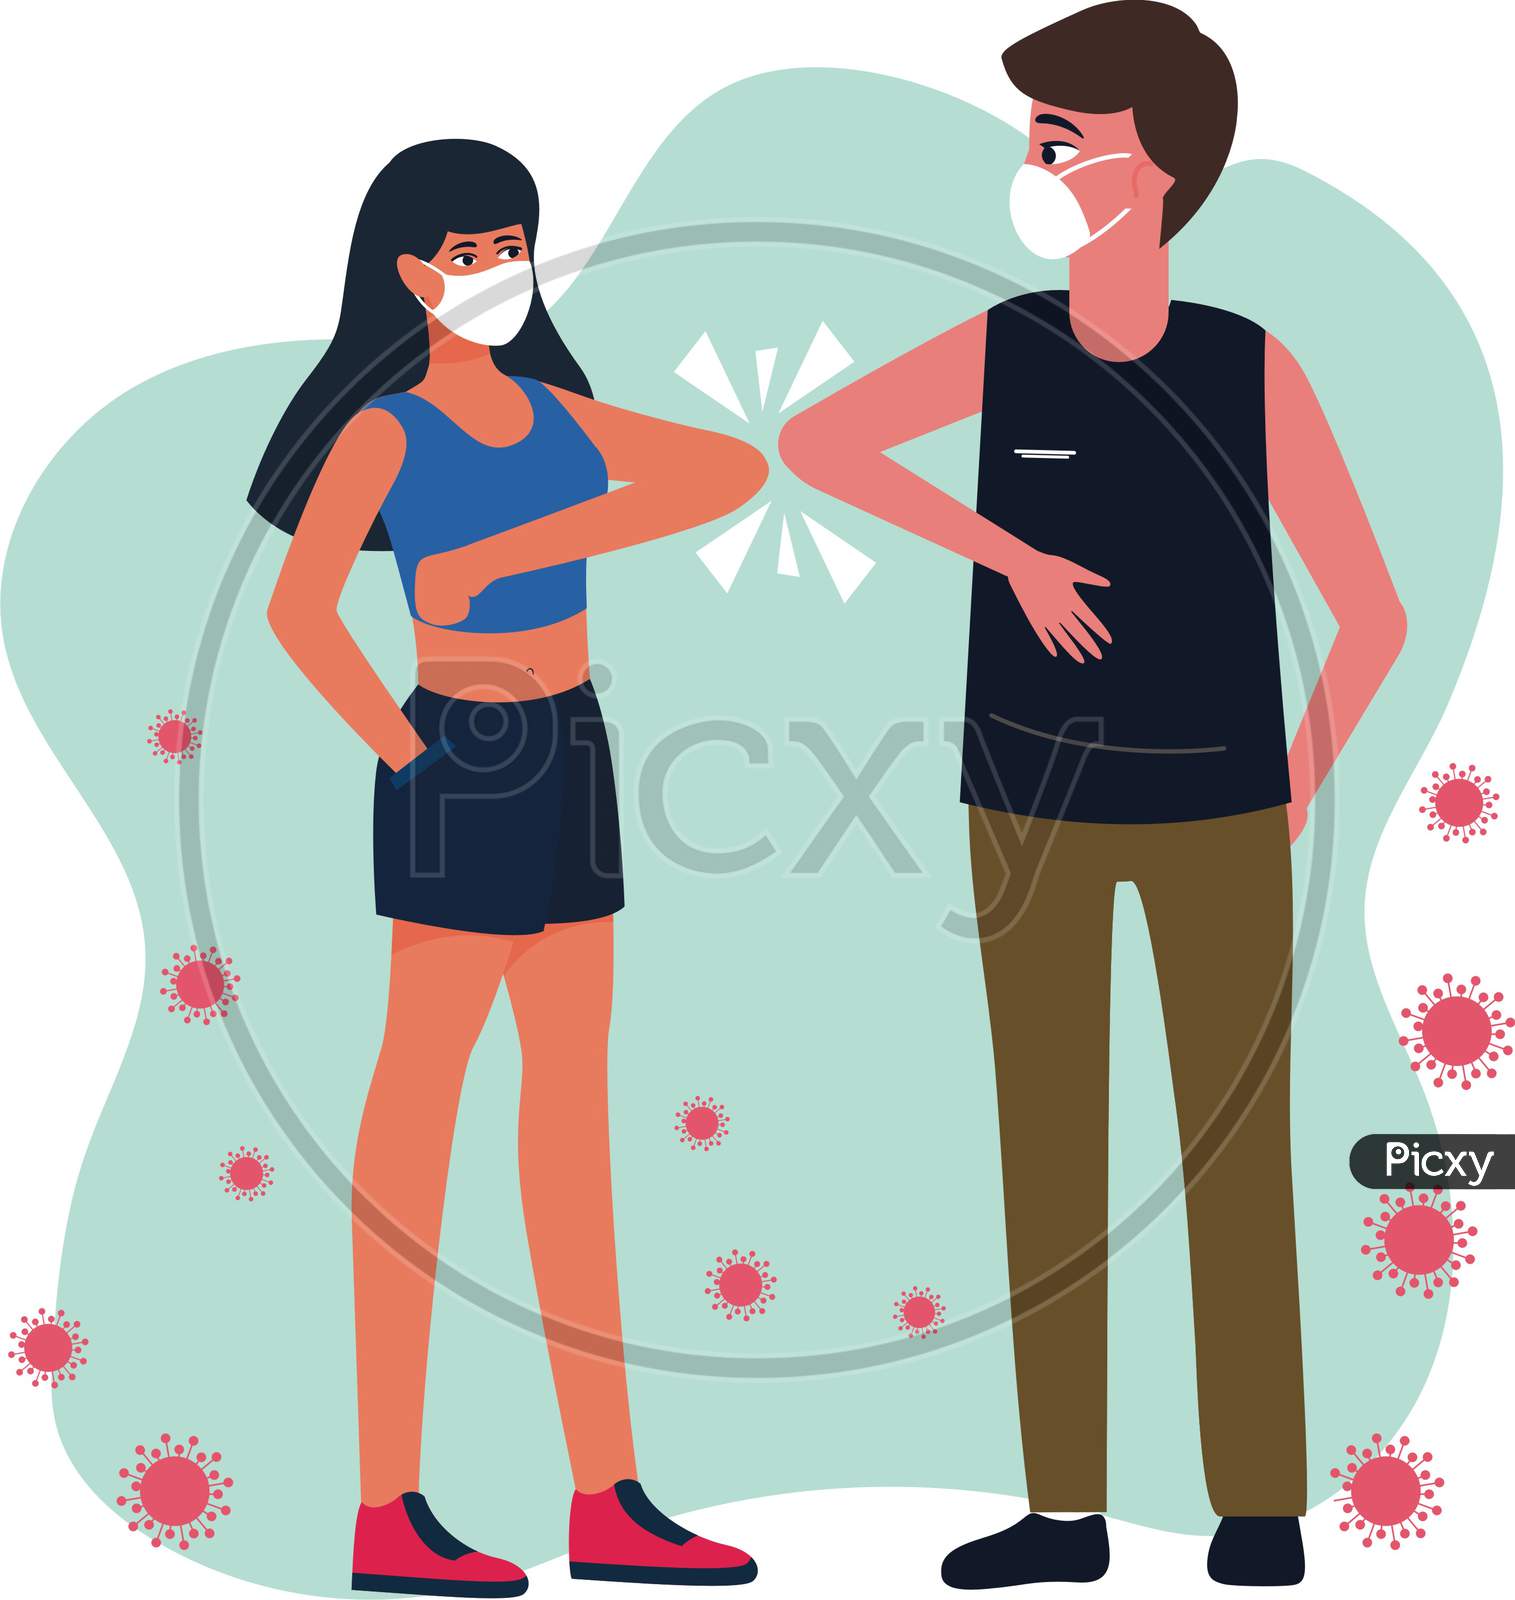 Greetings with the their elbows of man and woman wearing surgical masks.shot of bump elbows for greeting during coronavirus epidemic. new normal.Social Distancing.